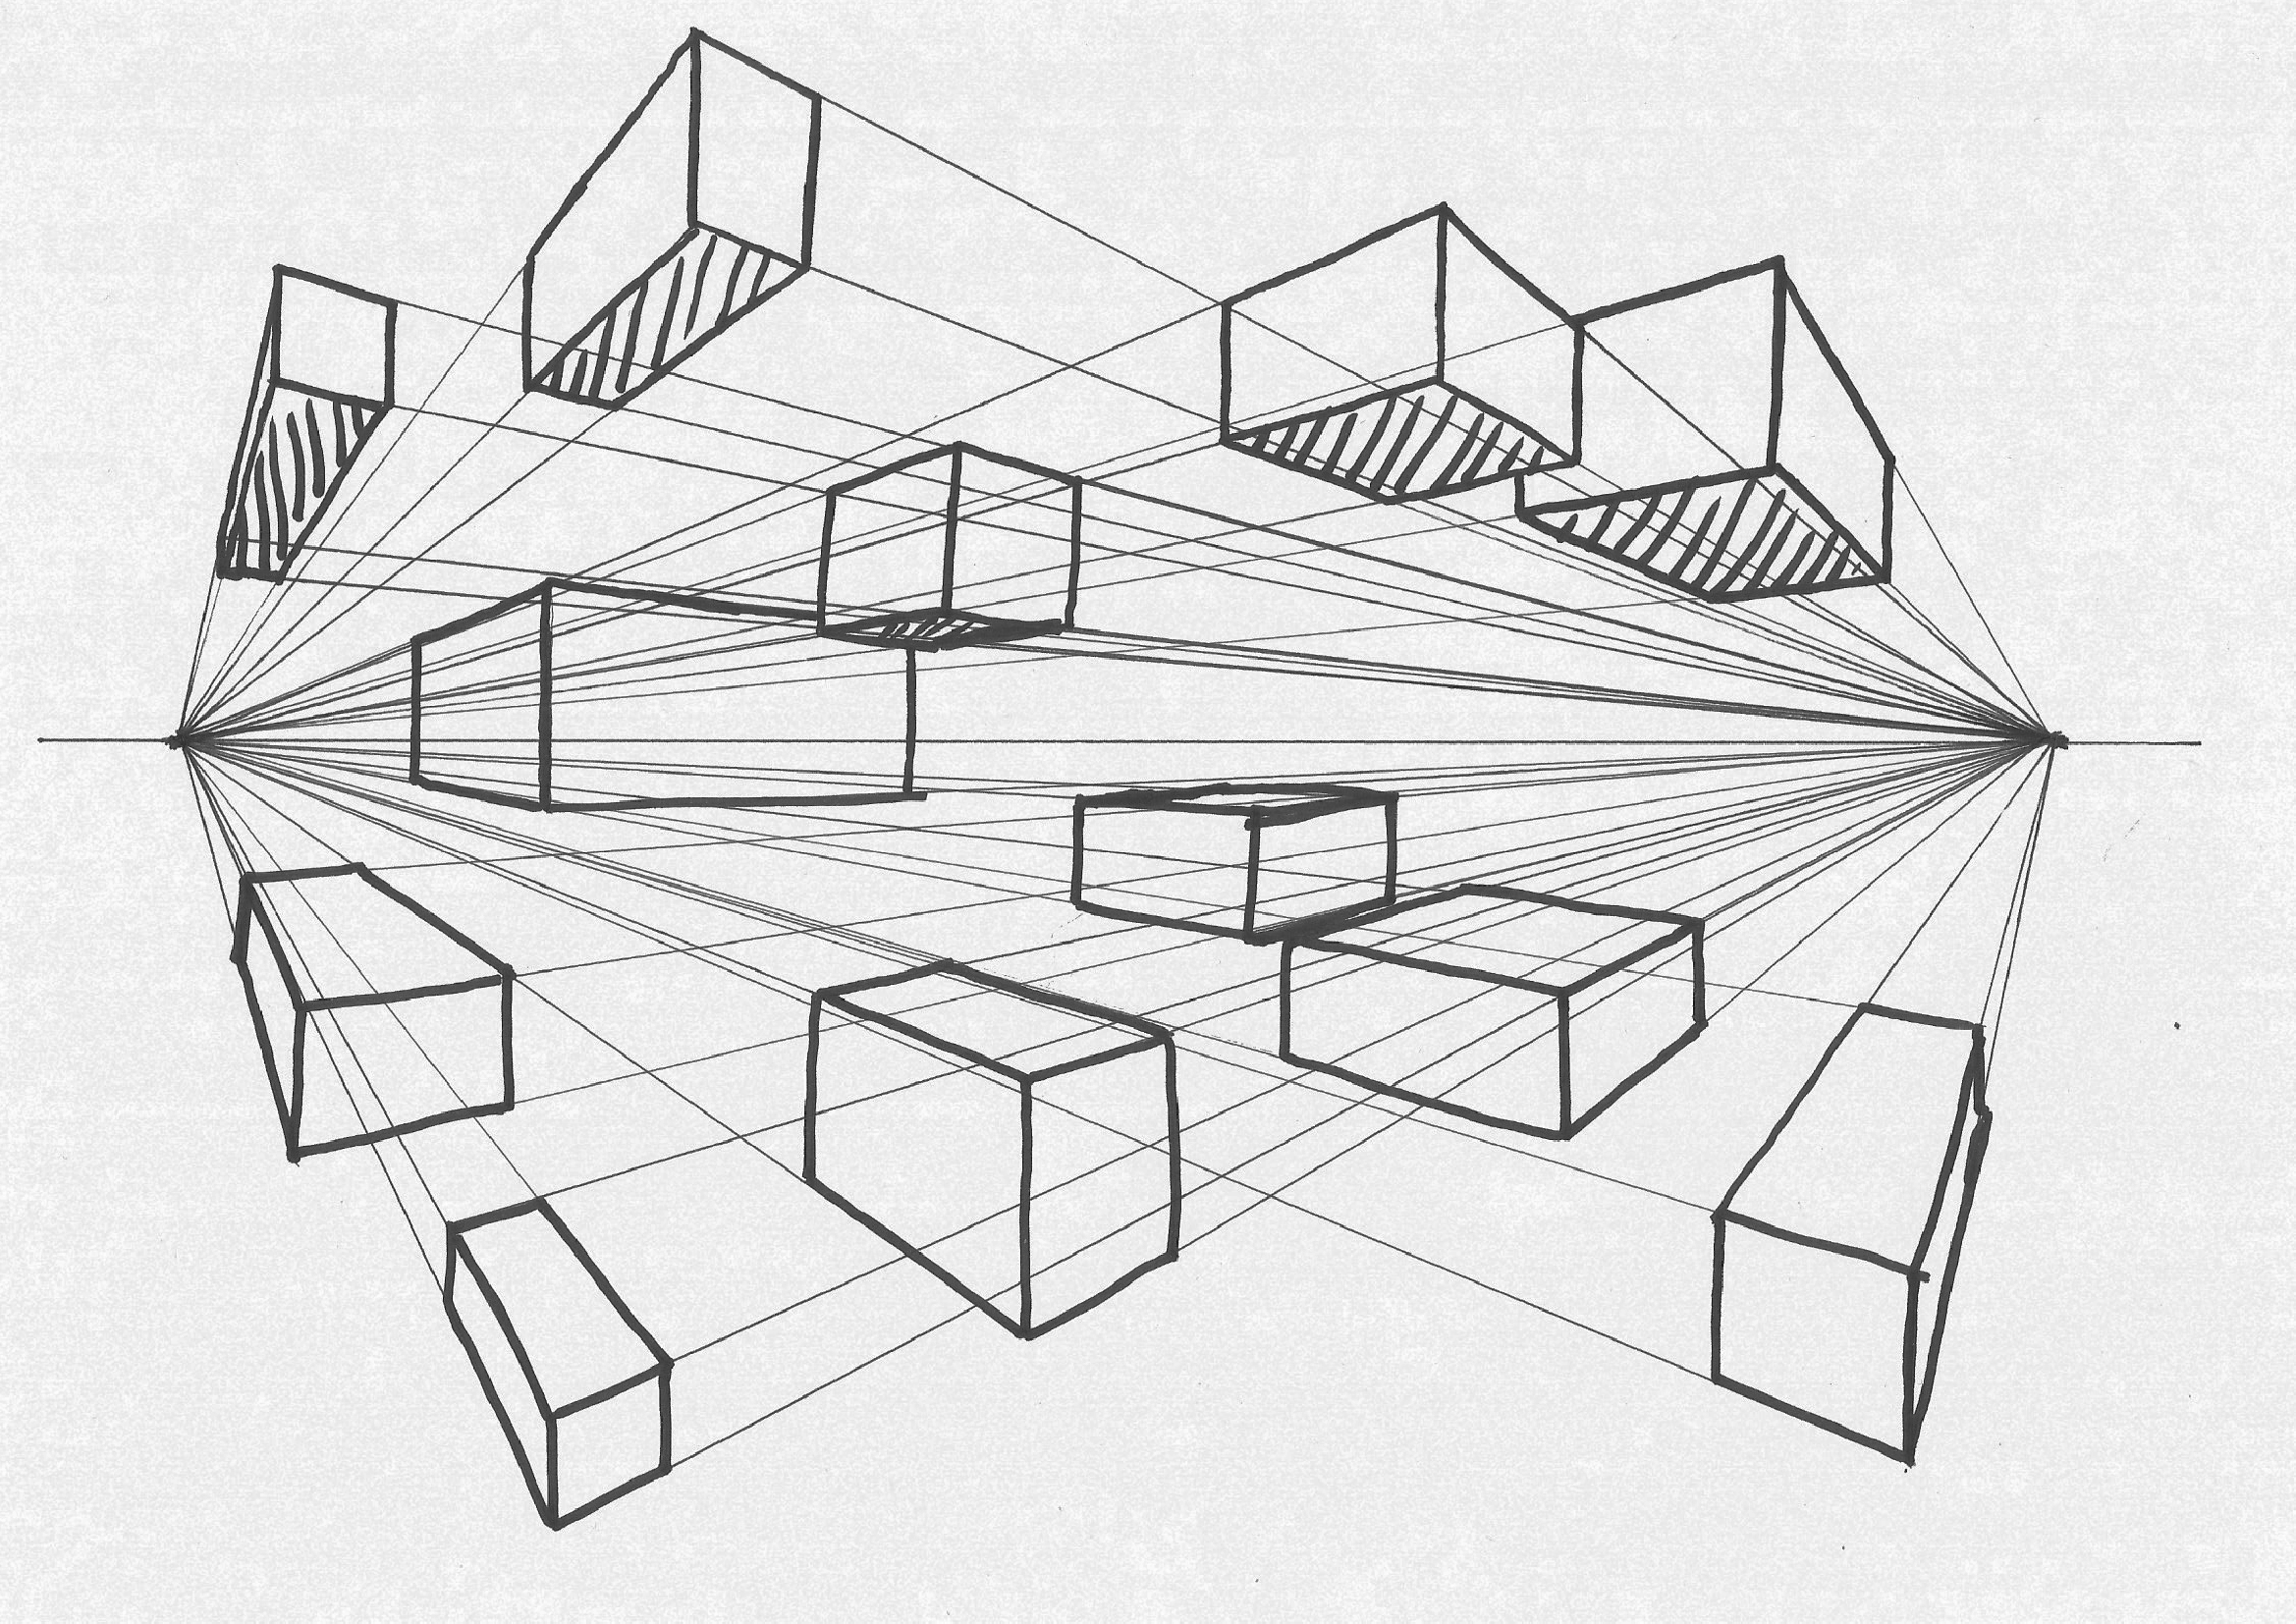 DRAWING WITH PERSPECTIVE: BOXES IN ONE-POINT AND TWO-POINT